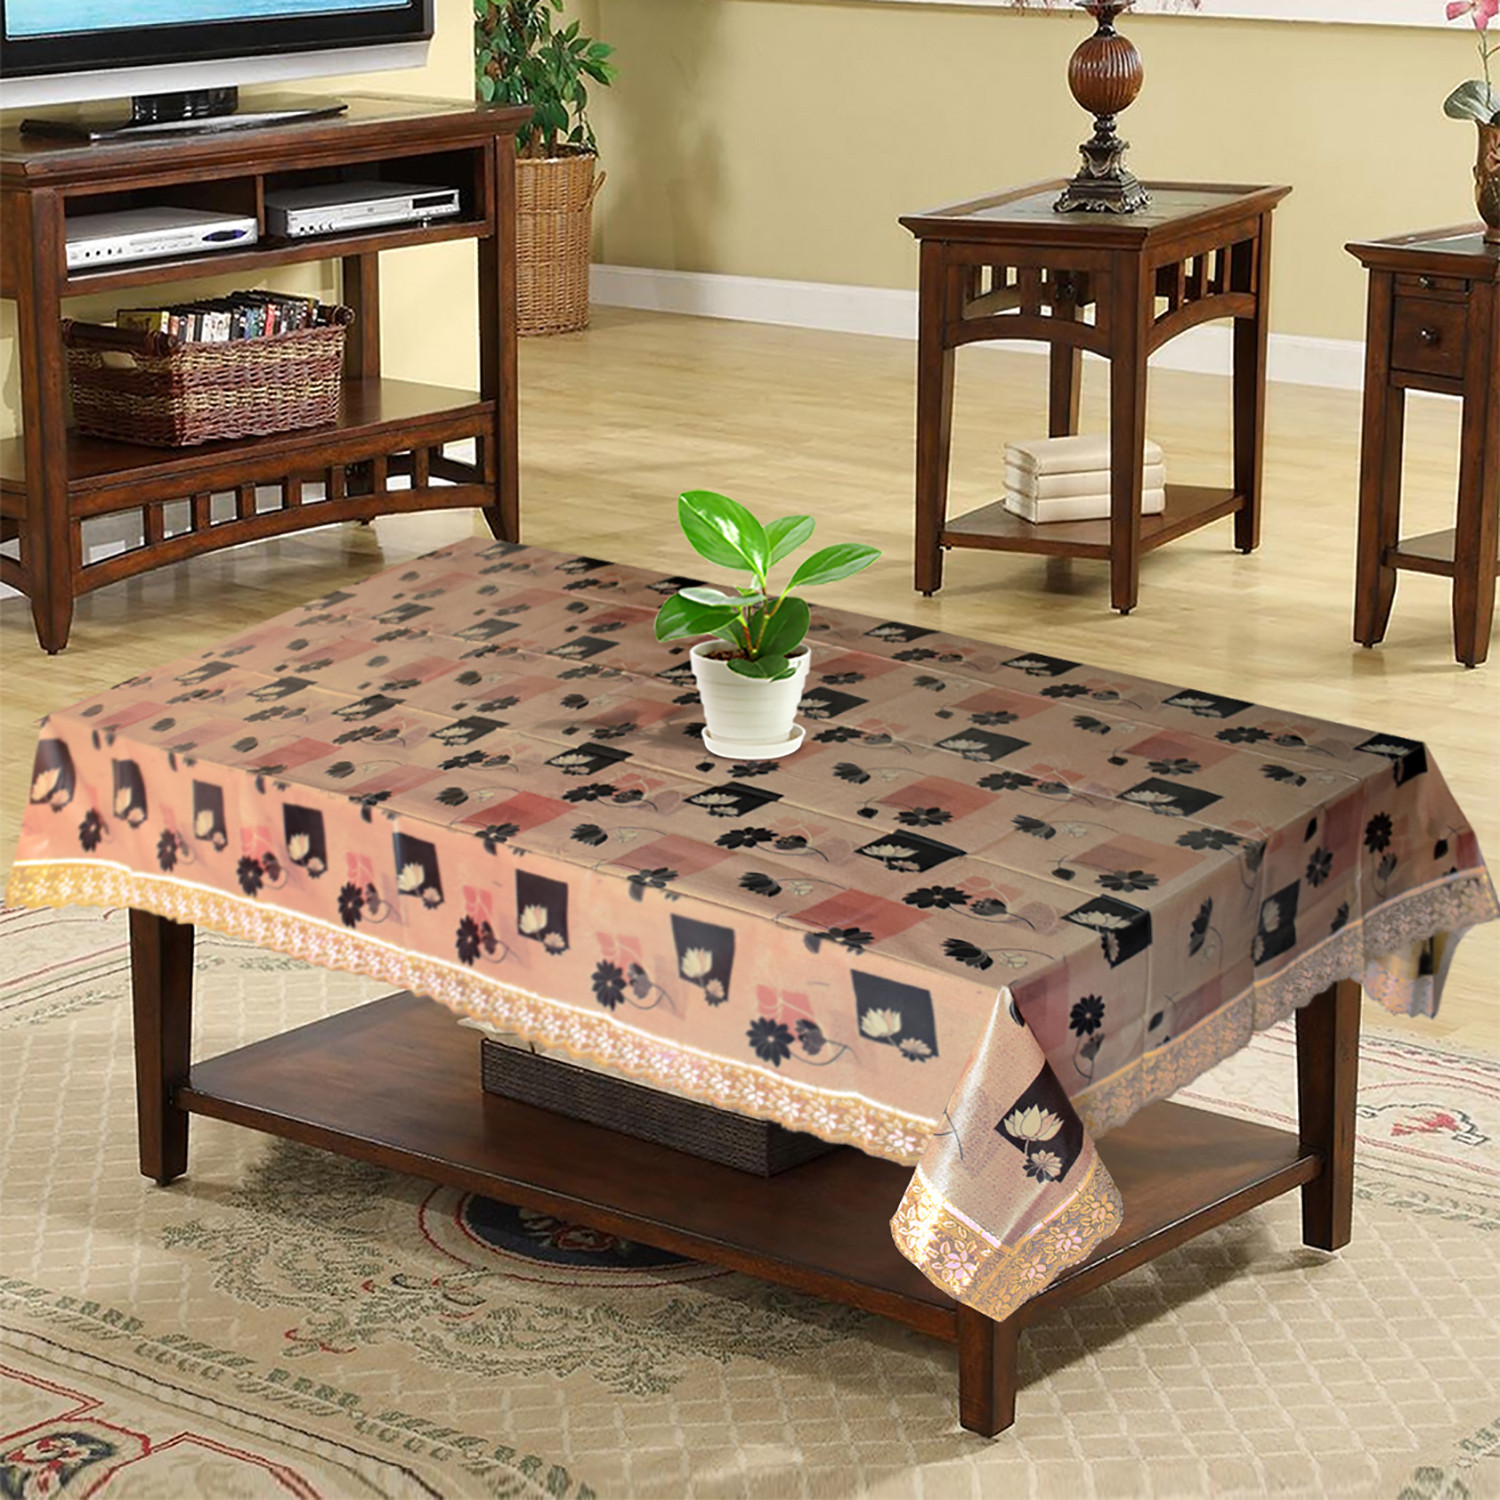 Kuber Industries Flower Printed PVC 4 Seater Center Table Cover, Protector With Gold Lace Border, 40